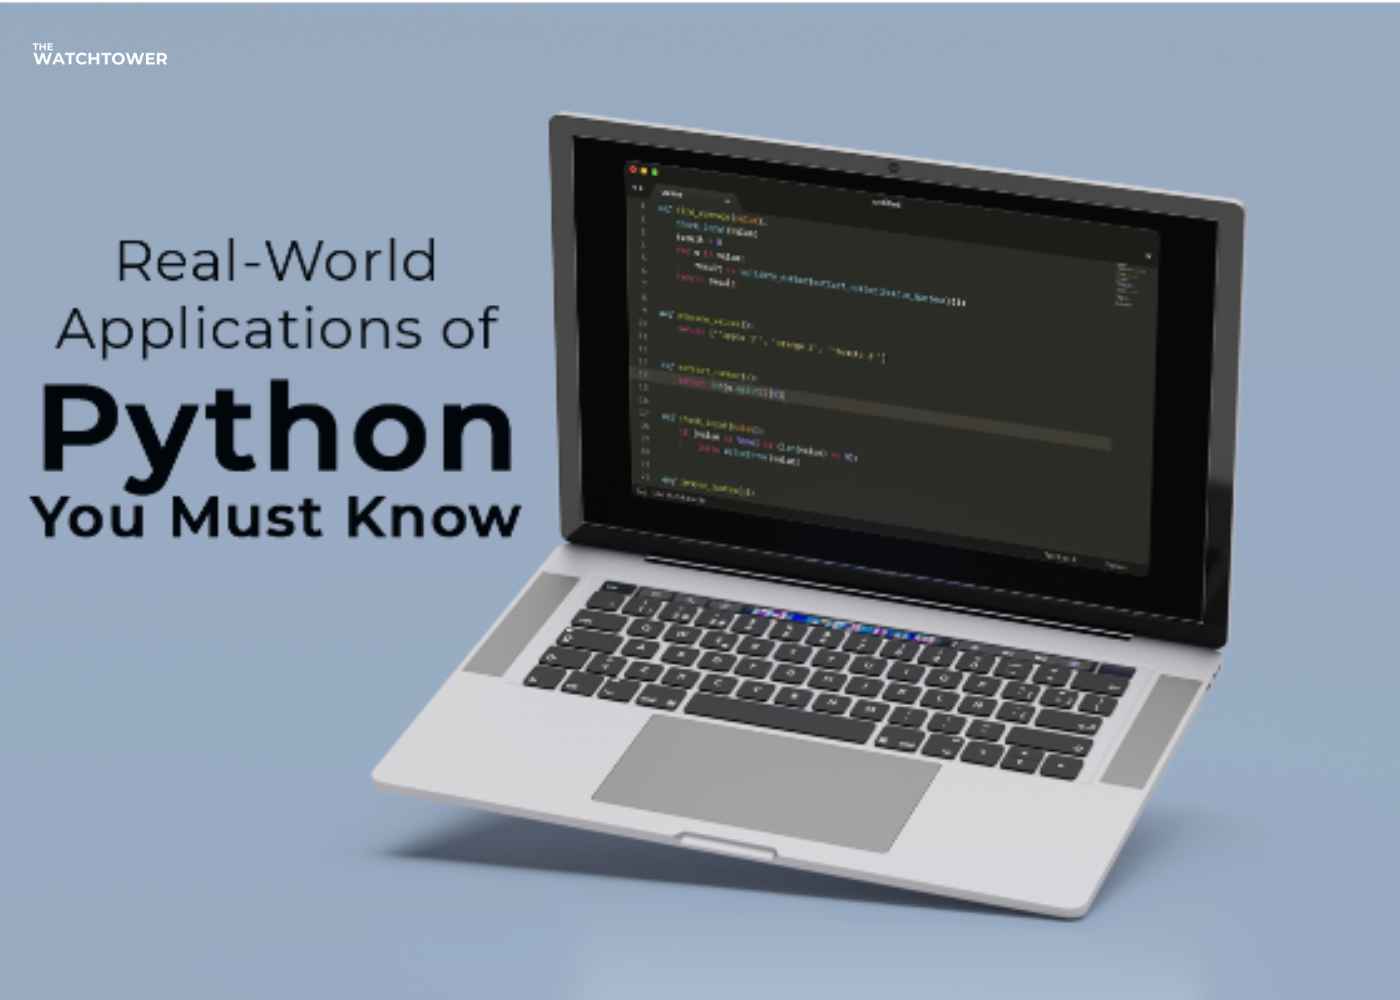 Real-world Applications of Python You Must Know